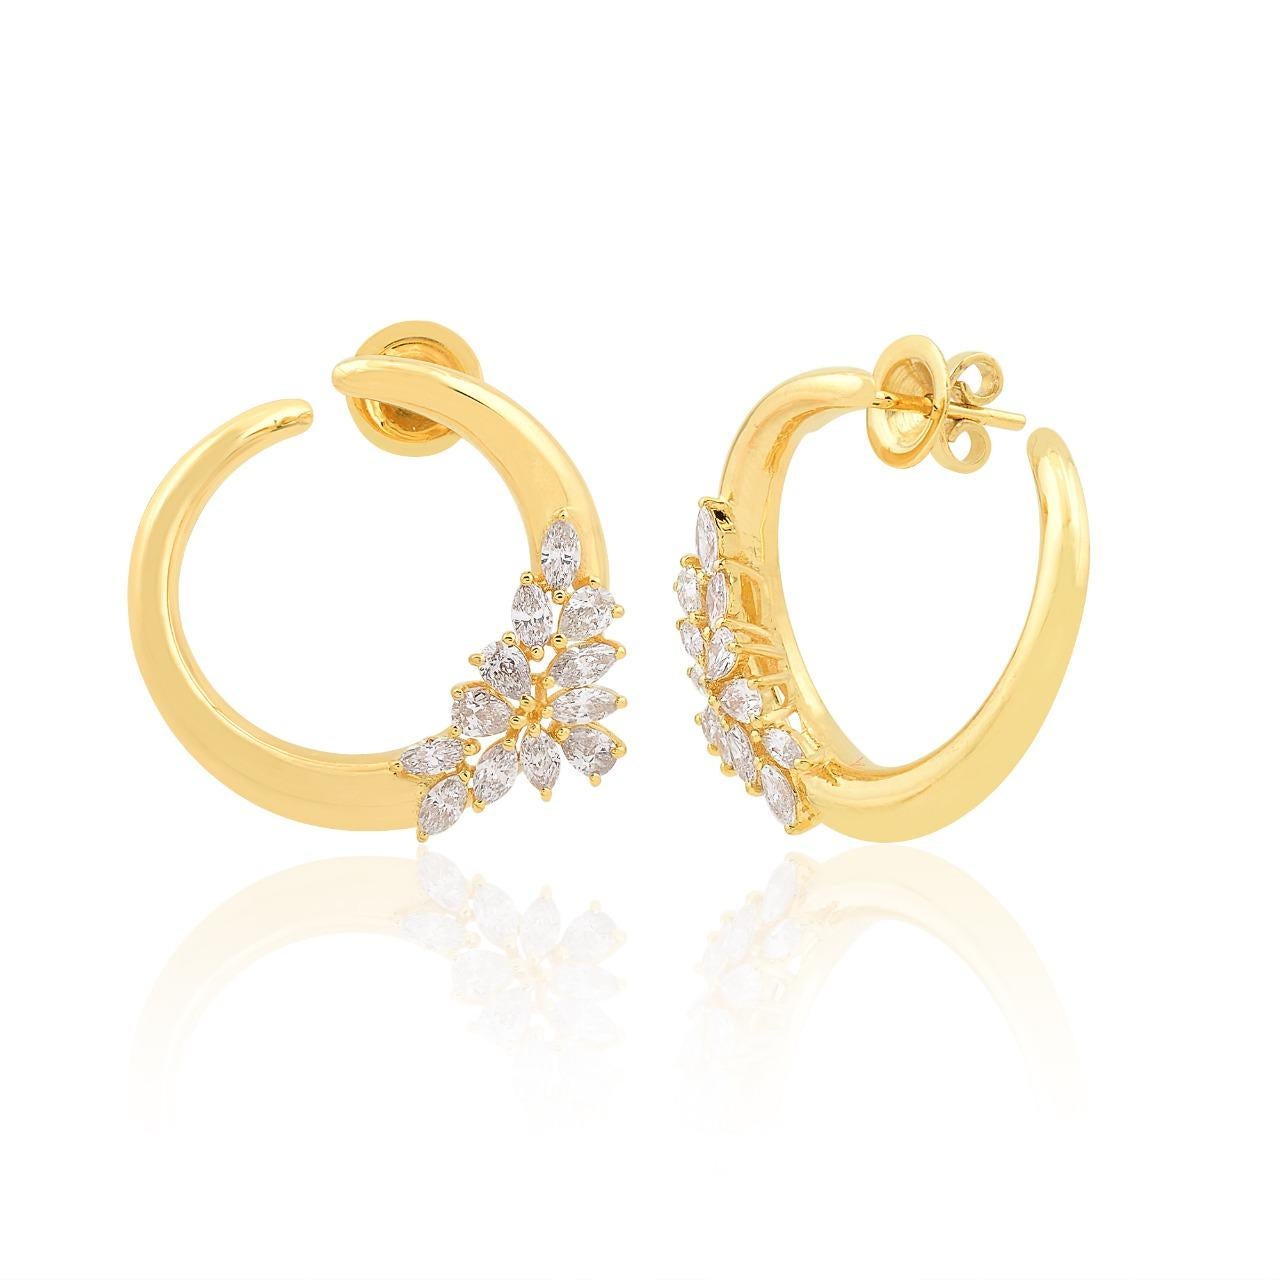 Cast from 14-karat gold, these beautiful earrings are hand set with 1.60 carats of sparkling diamonds. Available in rose and yellow gold.

FOLLOW MEGHNA JEWELS storefront to view the latest collection & exclusive pieces. Meghna Jewels is proudly